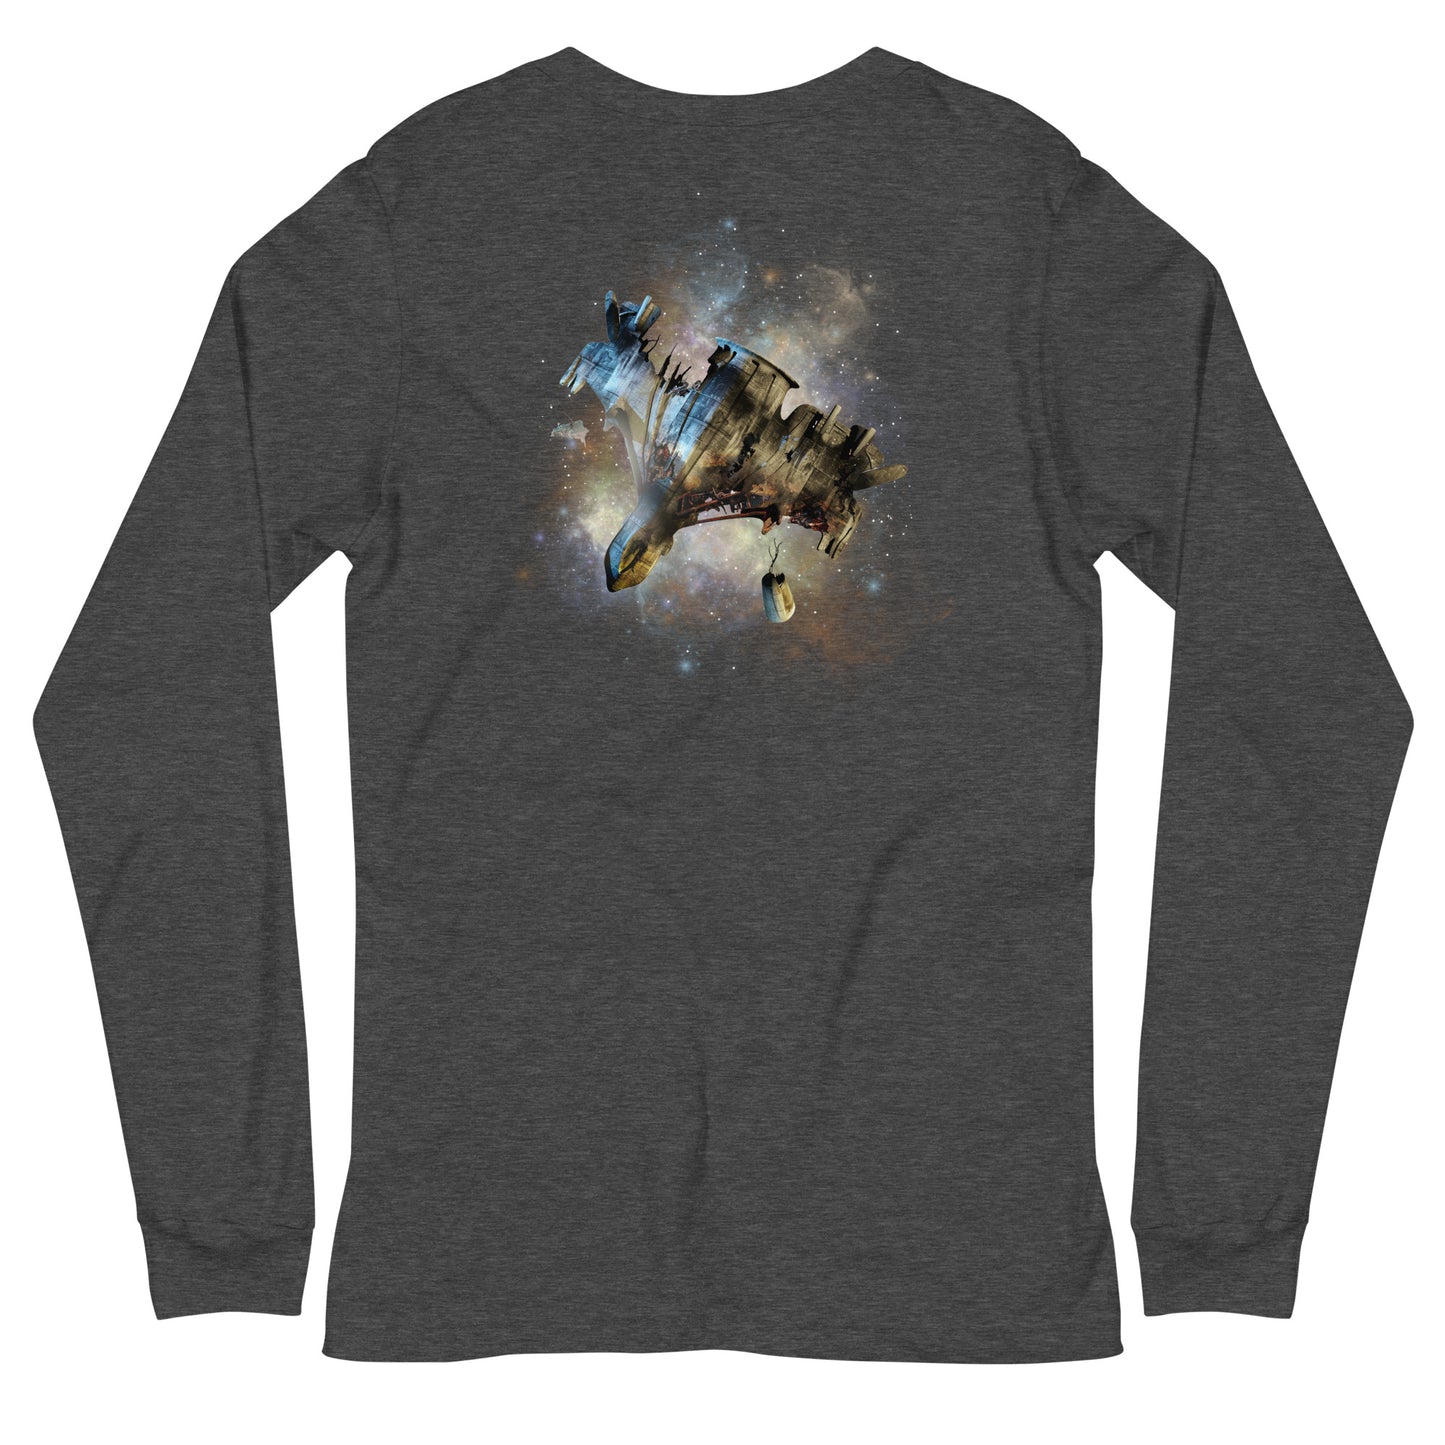 DIVING CREW & SPACESHIP WRECK L/S Tee - The Diving Universe by Kristine Kathryn Rusch